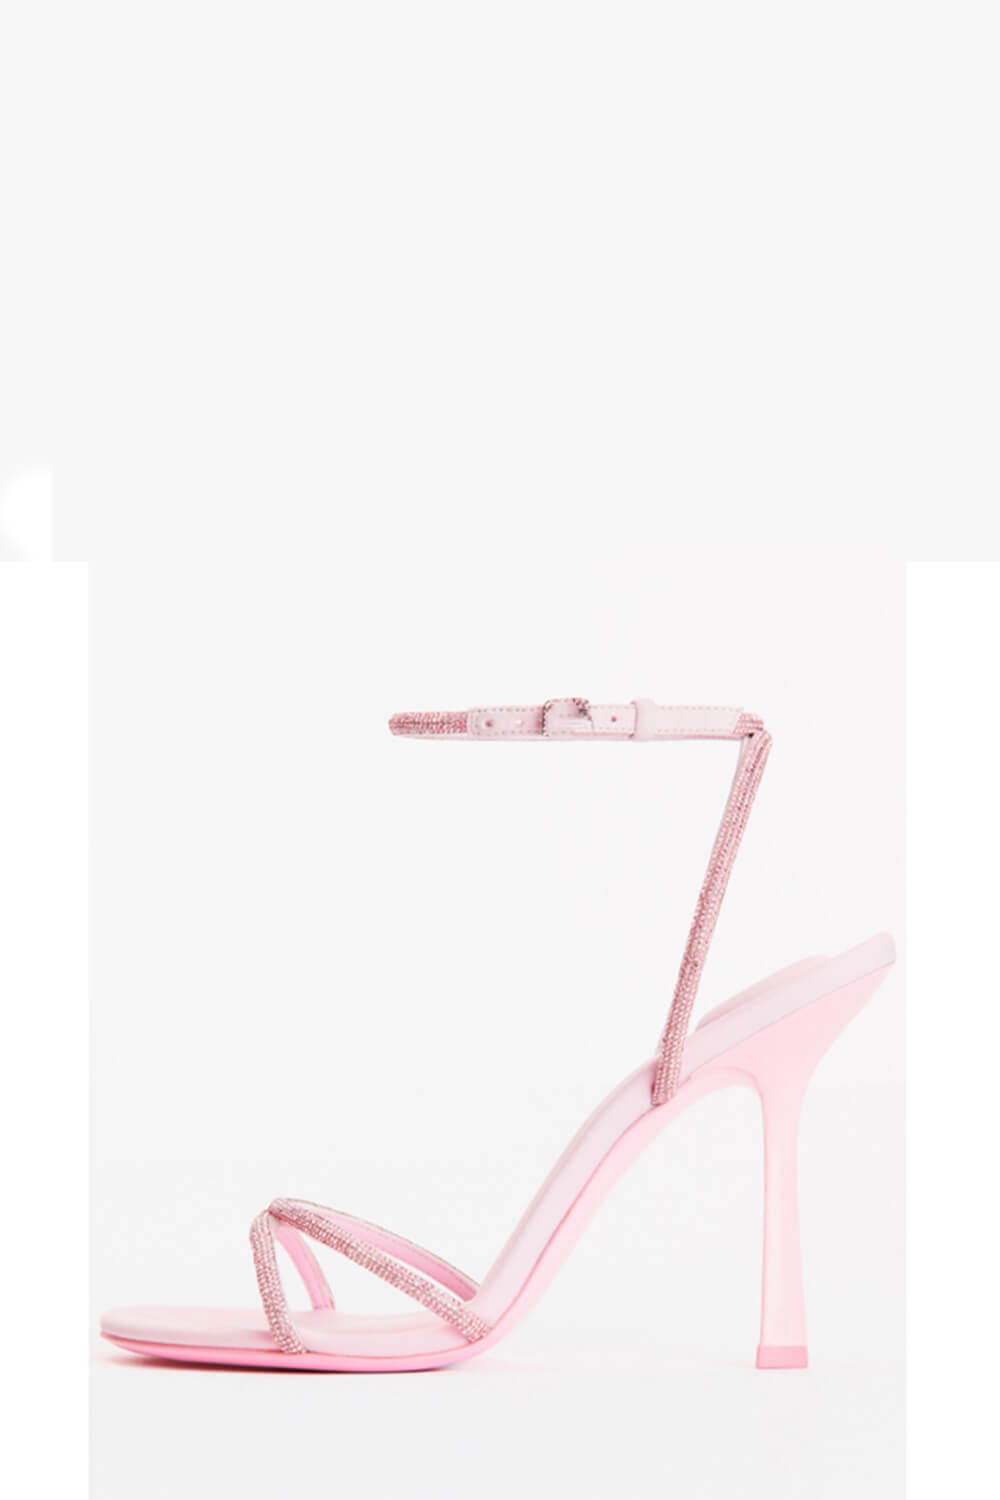 Crystal Faux Leather Square-Toe Heeled Ankle Sandals - Pink